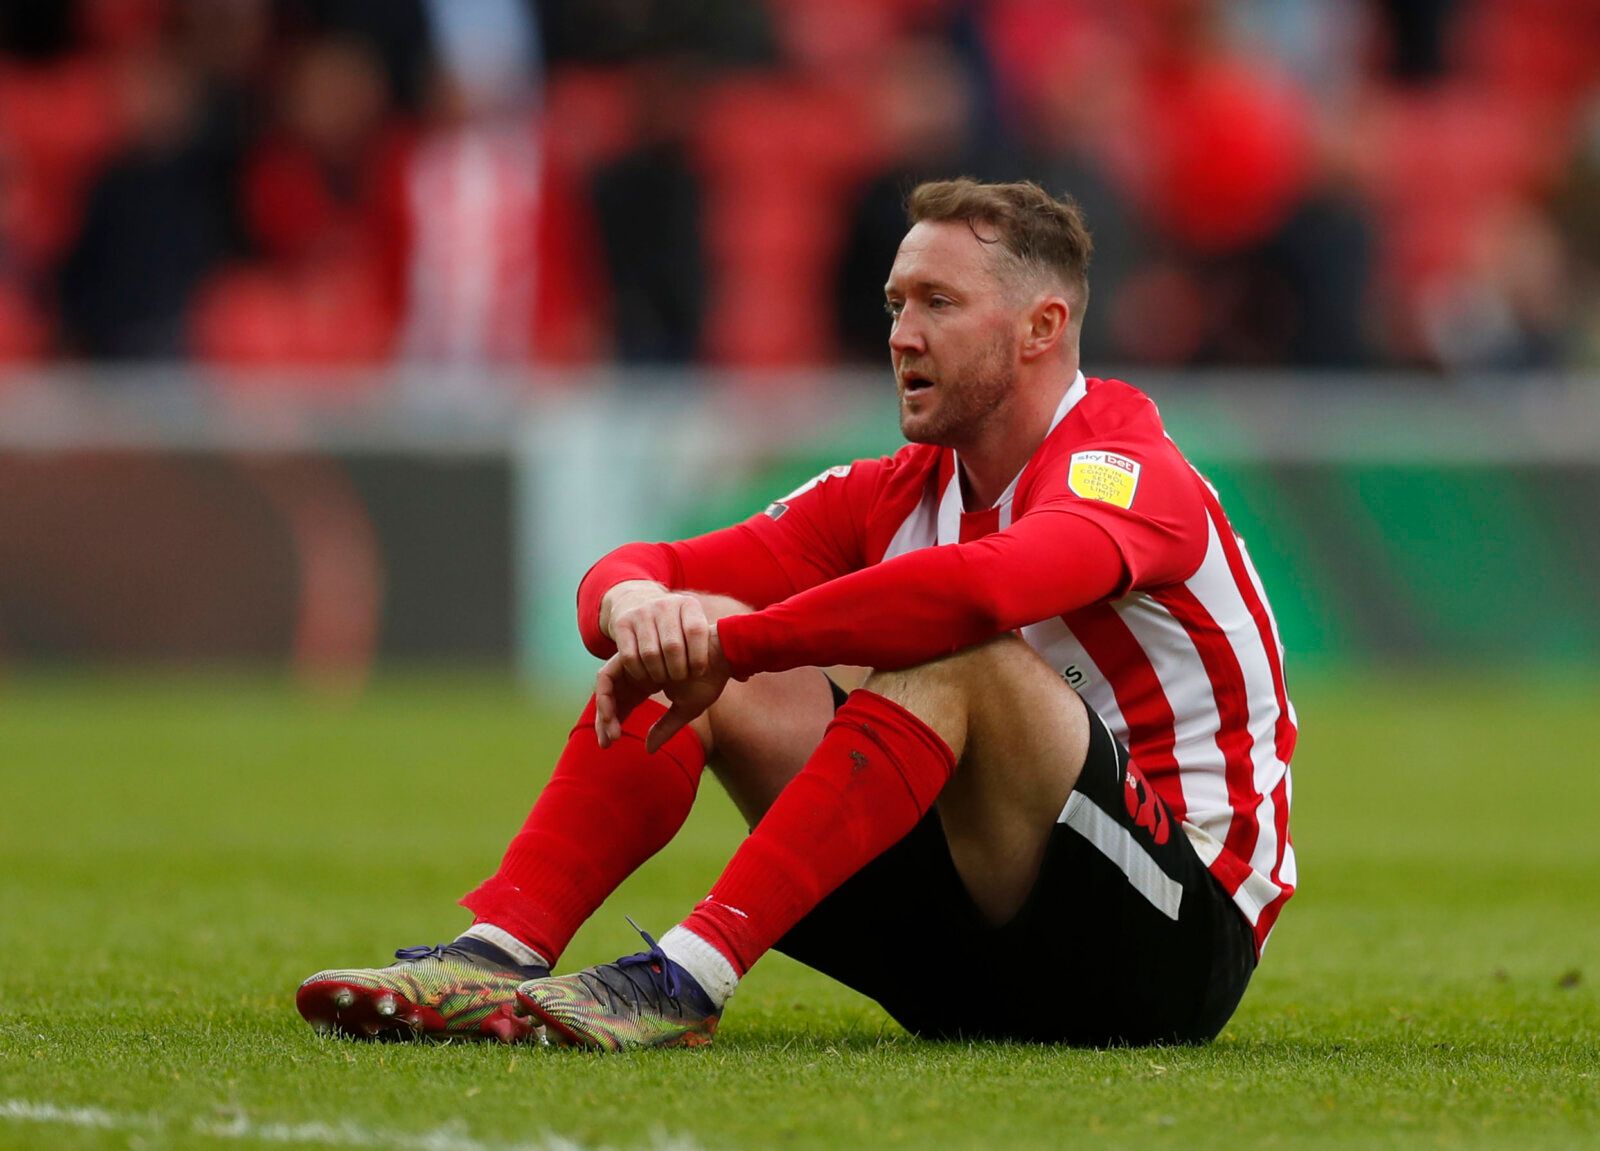 Soccer Football - League One Play-Off Semi Final Second Leg - Sunderland v Lincoln City - Stadium of Light, Sunderland, Britain - May 22, 2021  Sunderland's Aiden McGeady looks dejected after the match Action Images/Lee Smith EDITORIAL USE ONLY. No use with unauthorized audio, video, data, fixture lists, club/league logos or 'live' services. Online in-match use limited to 75 images, no video emulation. No use in betting, games or single club /league/player publications.  Please contact your acco